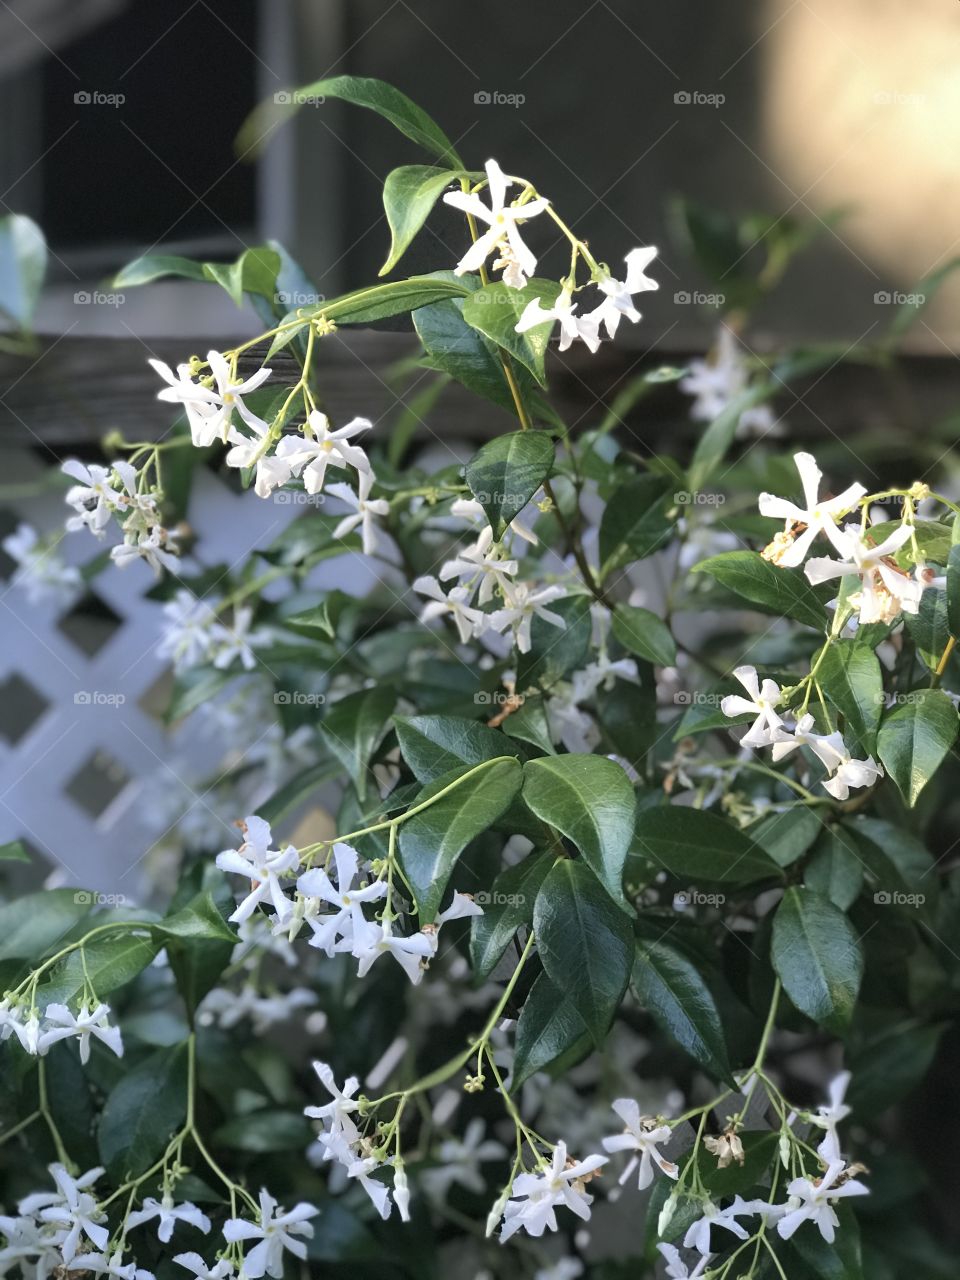 Sitting on my deck watching the golden setting sun sprinkle light on the top of my jasmine bush. As the evening approaches the scent of the jasmine strengthens & floats through the air perfuming the deck & my home through the open windows. 